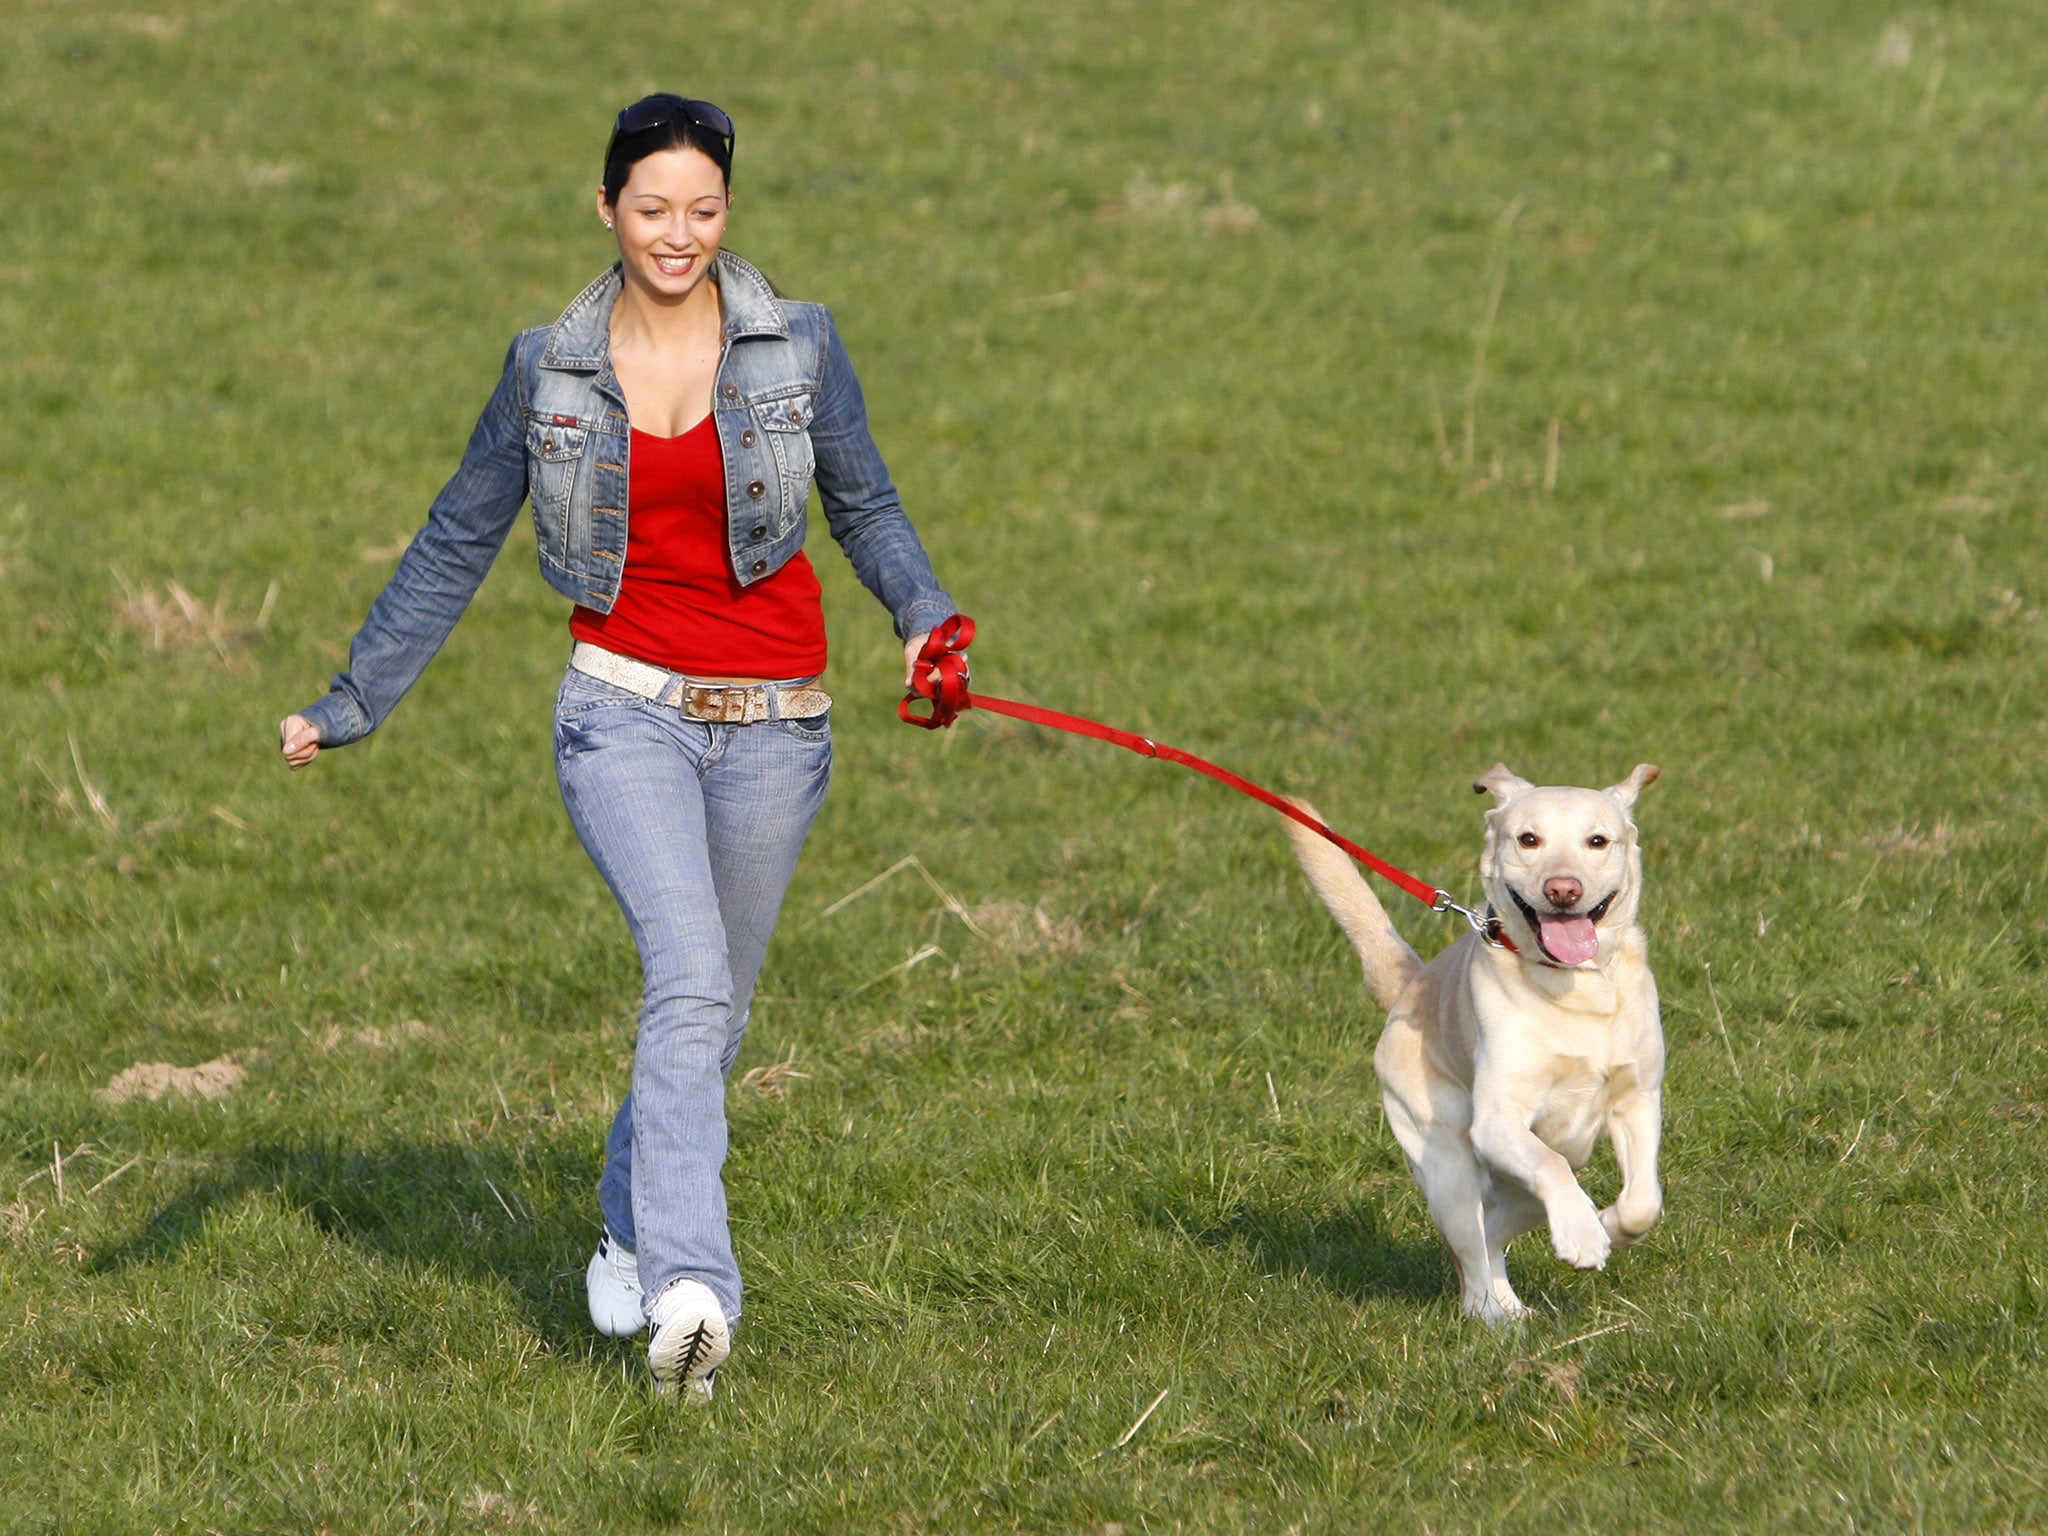 Just 25 minutes a day of brisk walking is enough to drive health improvements